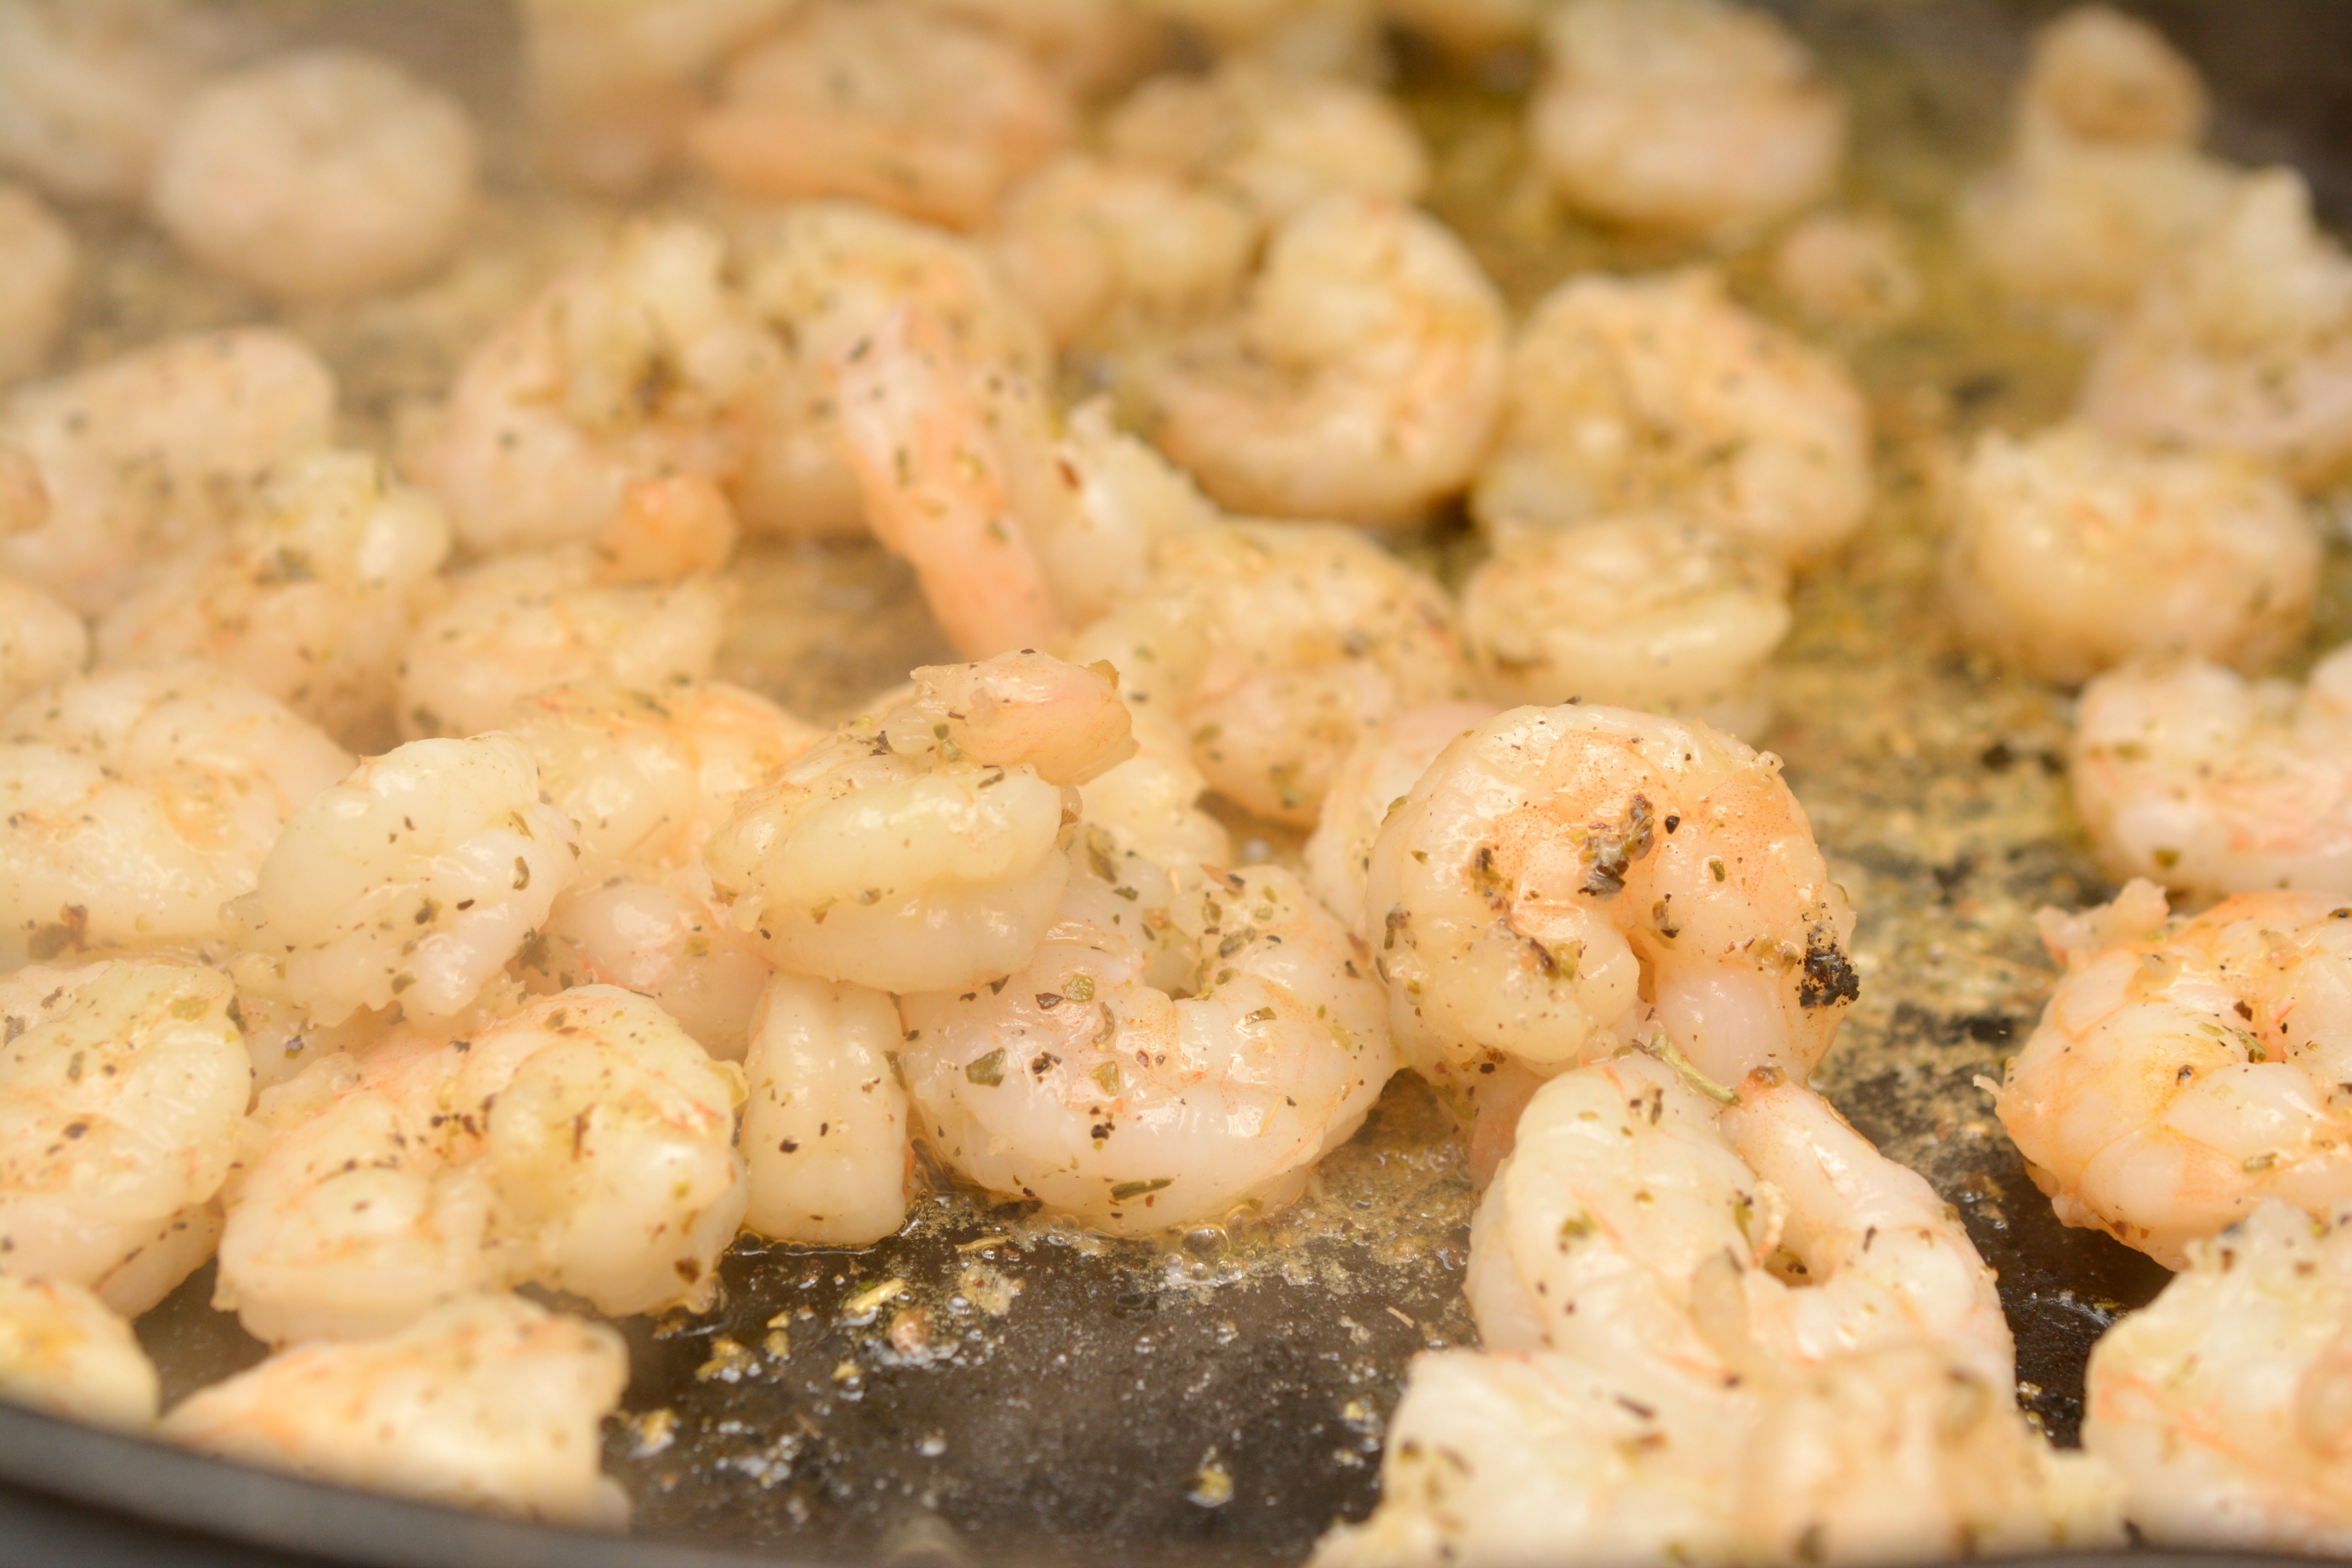 Love alfredo sauce? Want a low carb alfredo sauce? This keto-friendly Shrimp Alfredo is a delicious version of the original that won't ruin your new healthier lifestyle. You won't miss anything but the carbs with this recipe. 